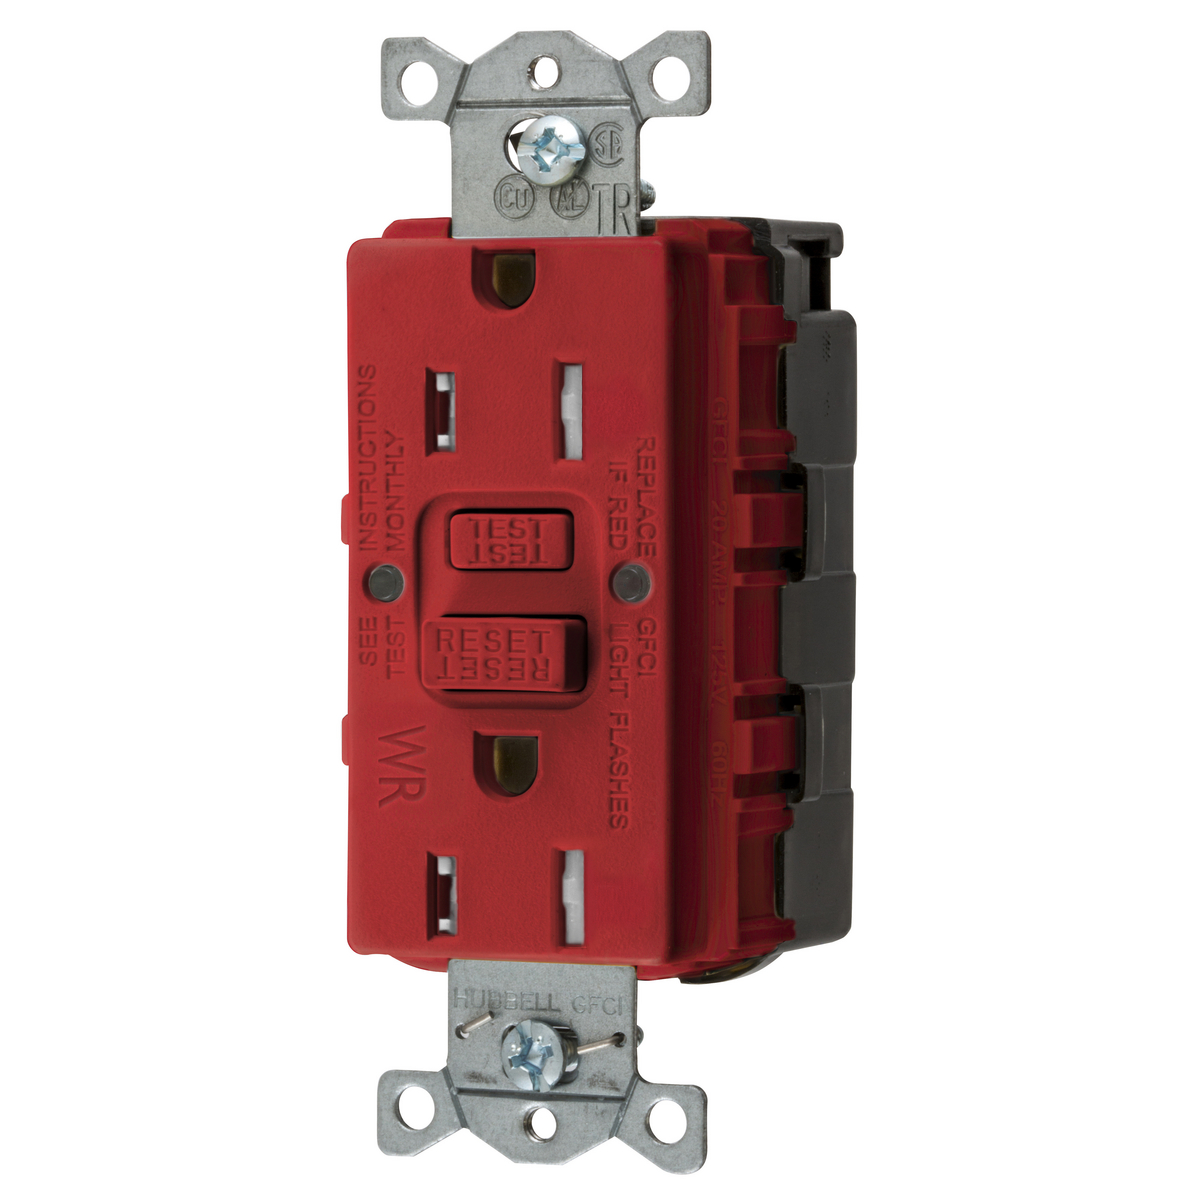 Gfci Receptacle, 15A 125V, 2-P 3-W Grounding, 5-15R, Red